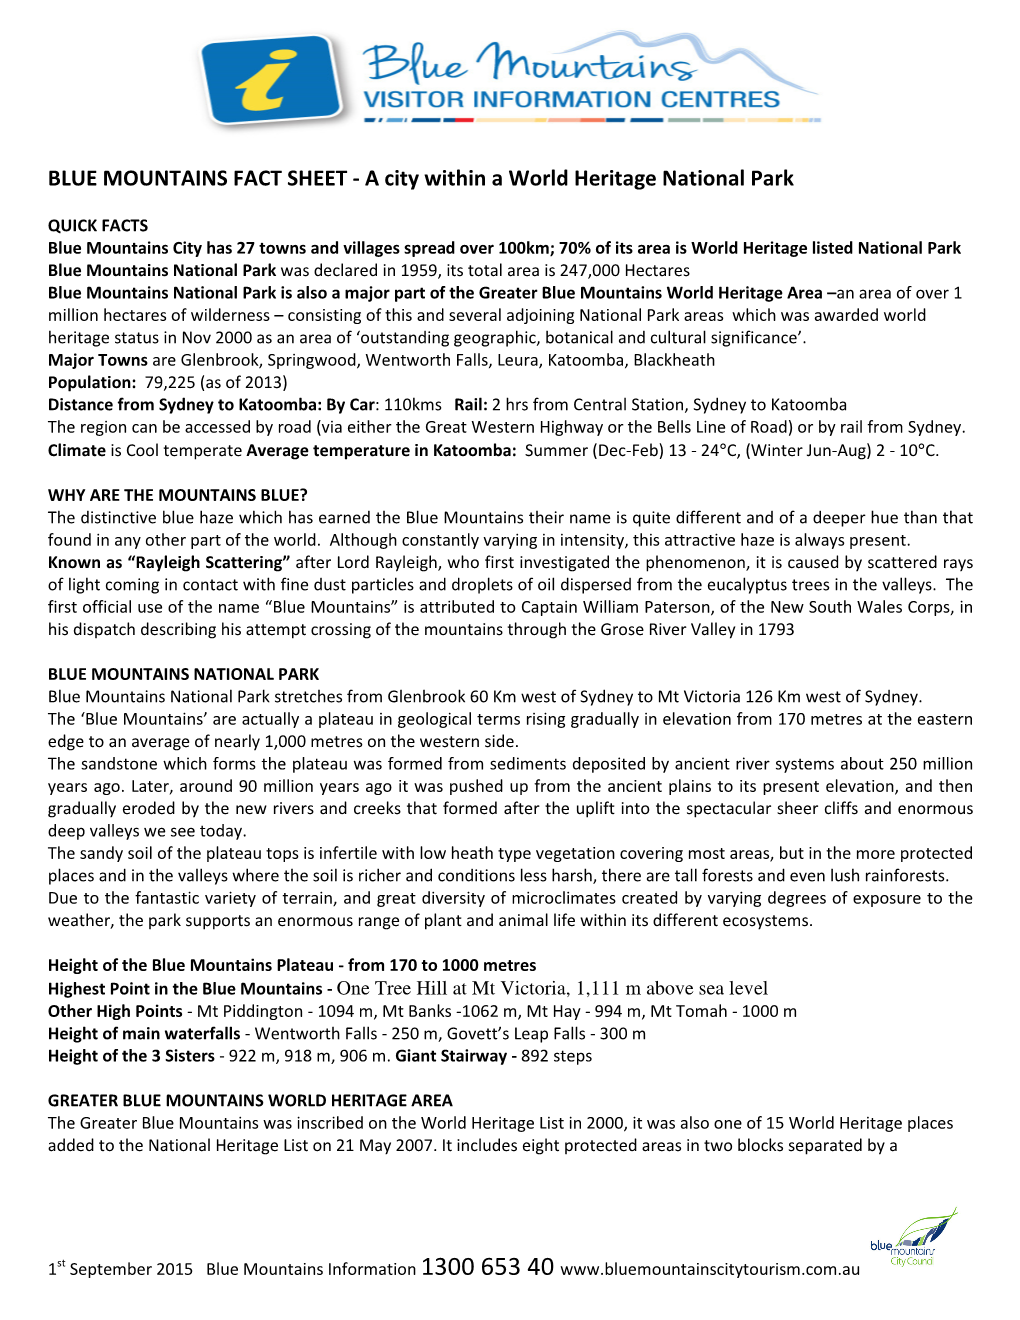 BLUE MOUNTAINS FACT SHEET - a City Within a World Heritage National Park